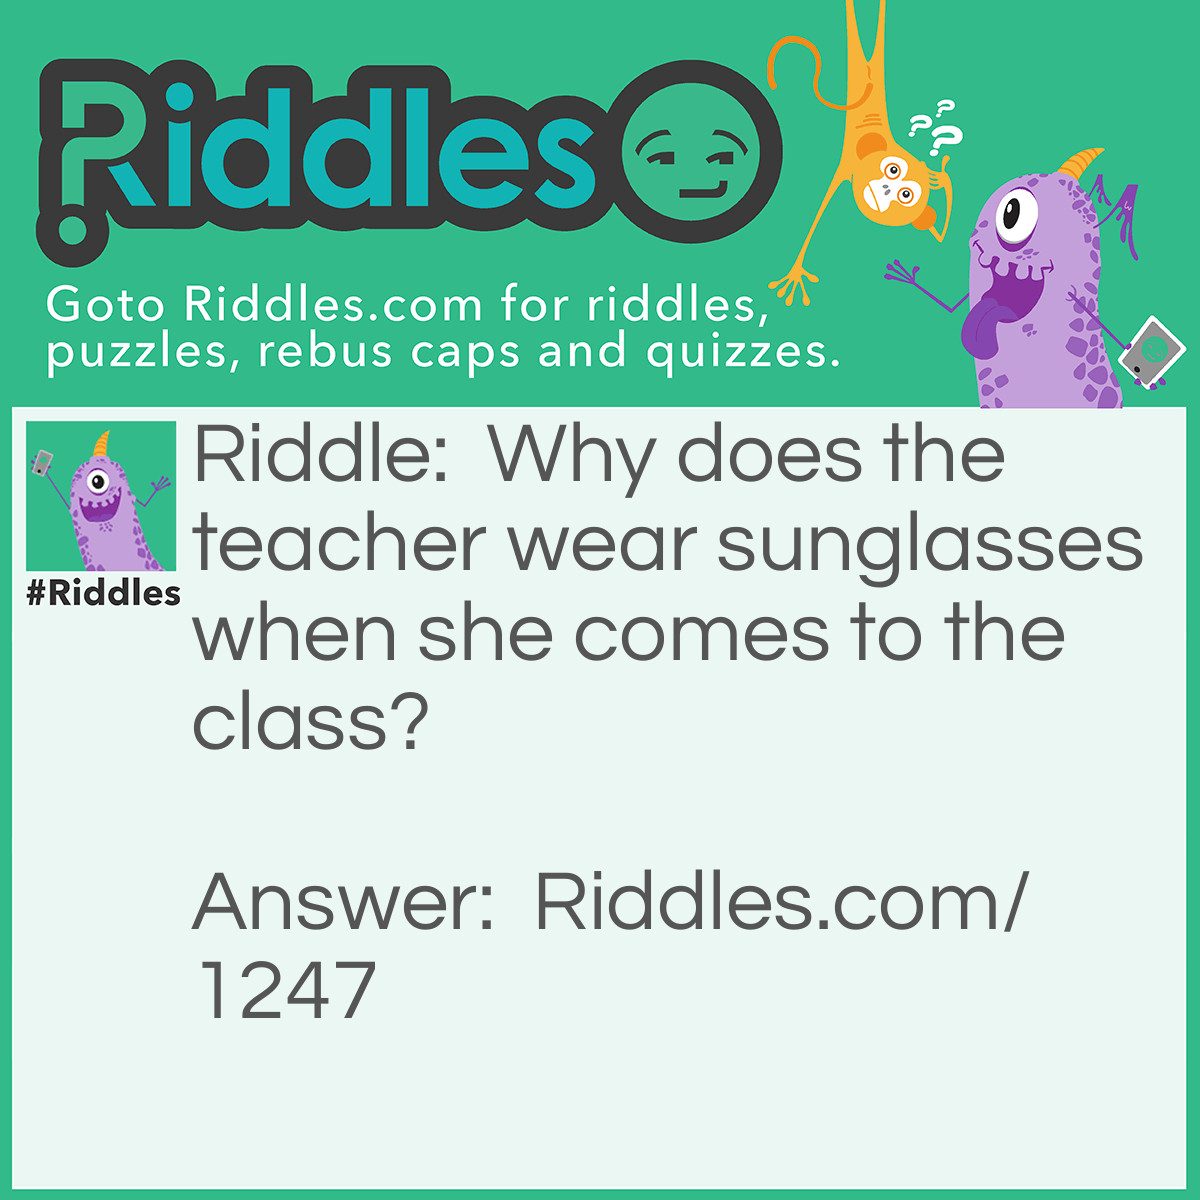 Riddle: Why does the teacher wear sunglasses when she comes to the class? Answer: Because the students are bright.